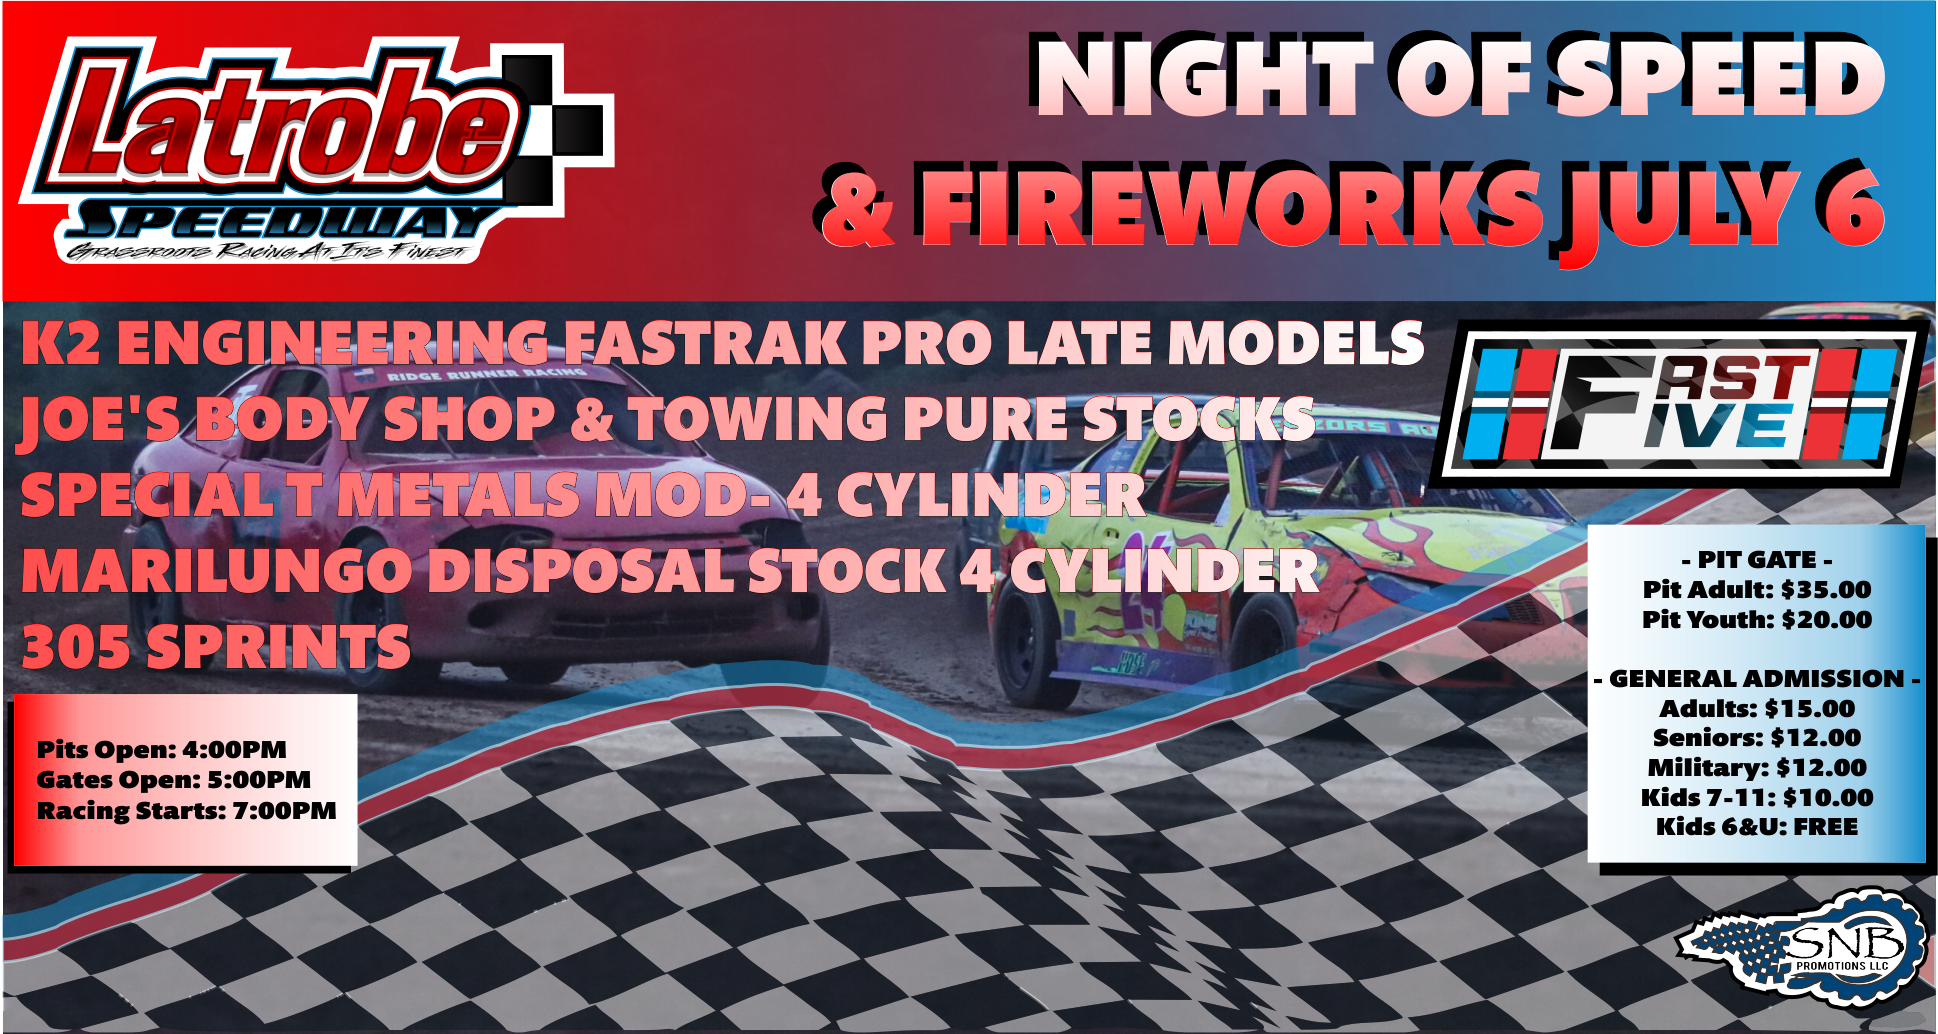 Night of Speed and Fireworks